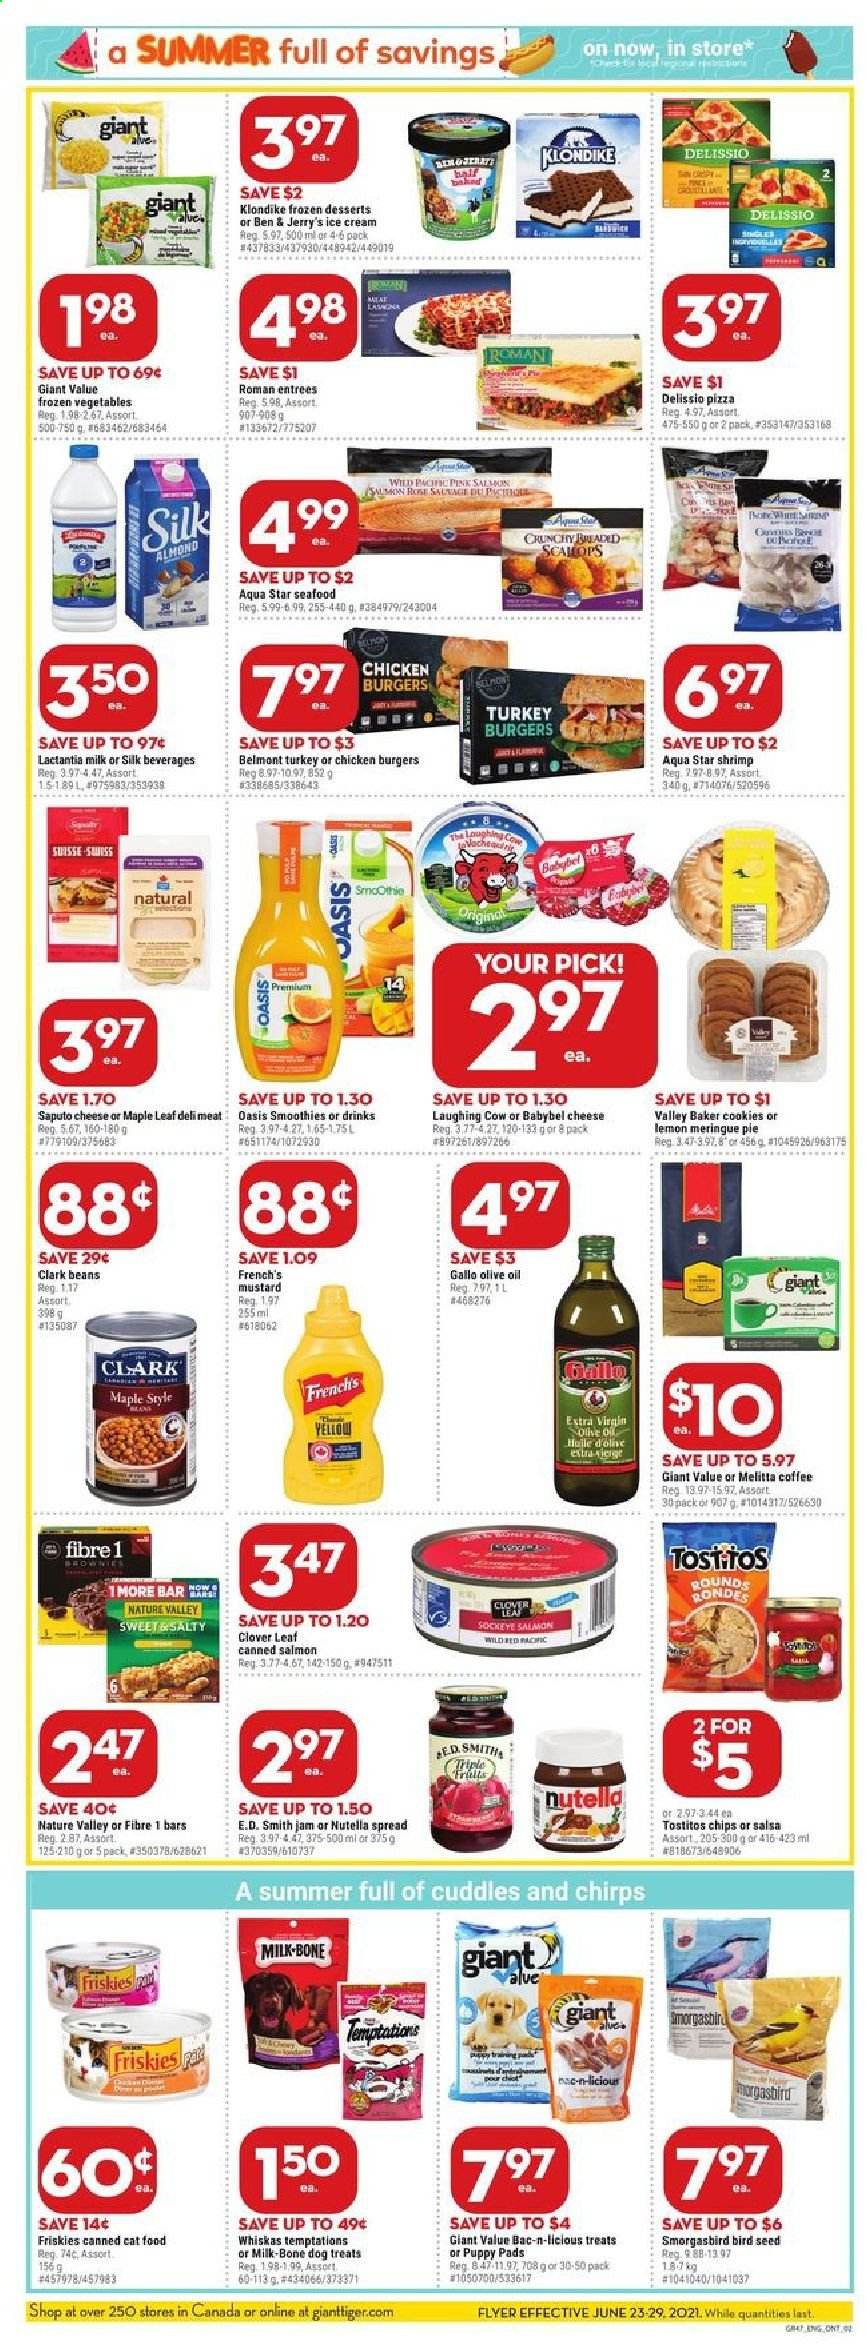 thumbnail - Giant Tiger Flyer - June 23, 2021 - June 29, 2021 - Sales products - pie, shrimps, pizza, hamburger, The Laughing Cow, Babybel, Clover, milk, Silk, ice cream, Ben & Jerry's, frozen vegetables, cookies, Tostitos, Nature Valley, mustard, salsa, olive oil, oil, fruit jam, smoothie, coffee, turkey burger, puppy pads, animal food, bird food, cat food, plant seeds, Friskies, Nutella. Page 2.